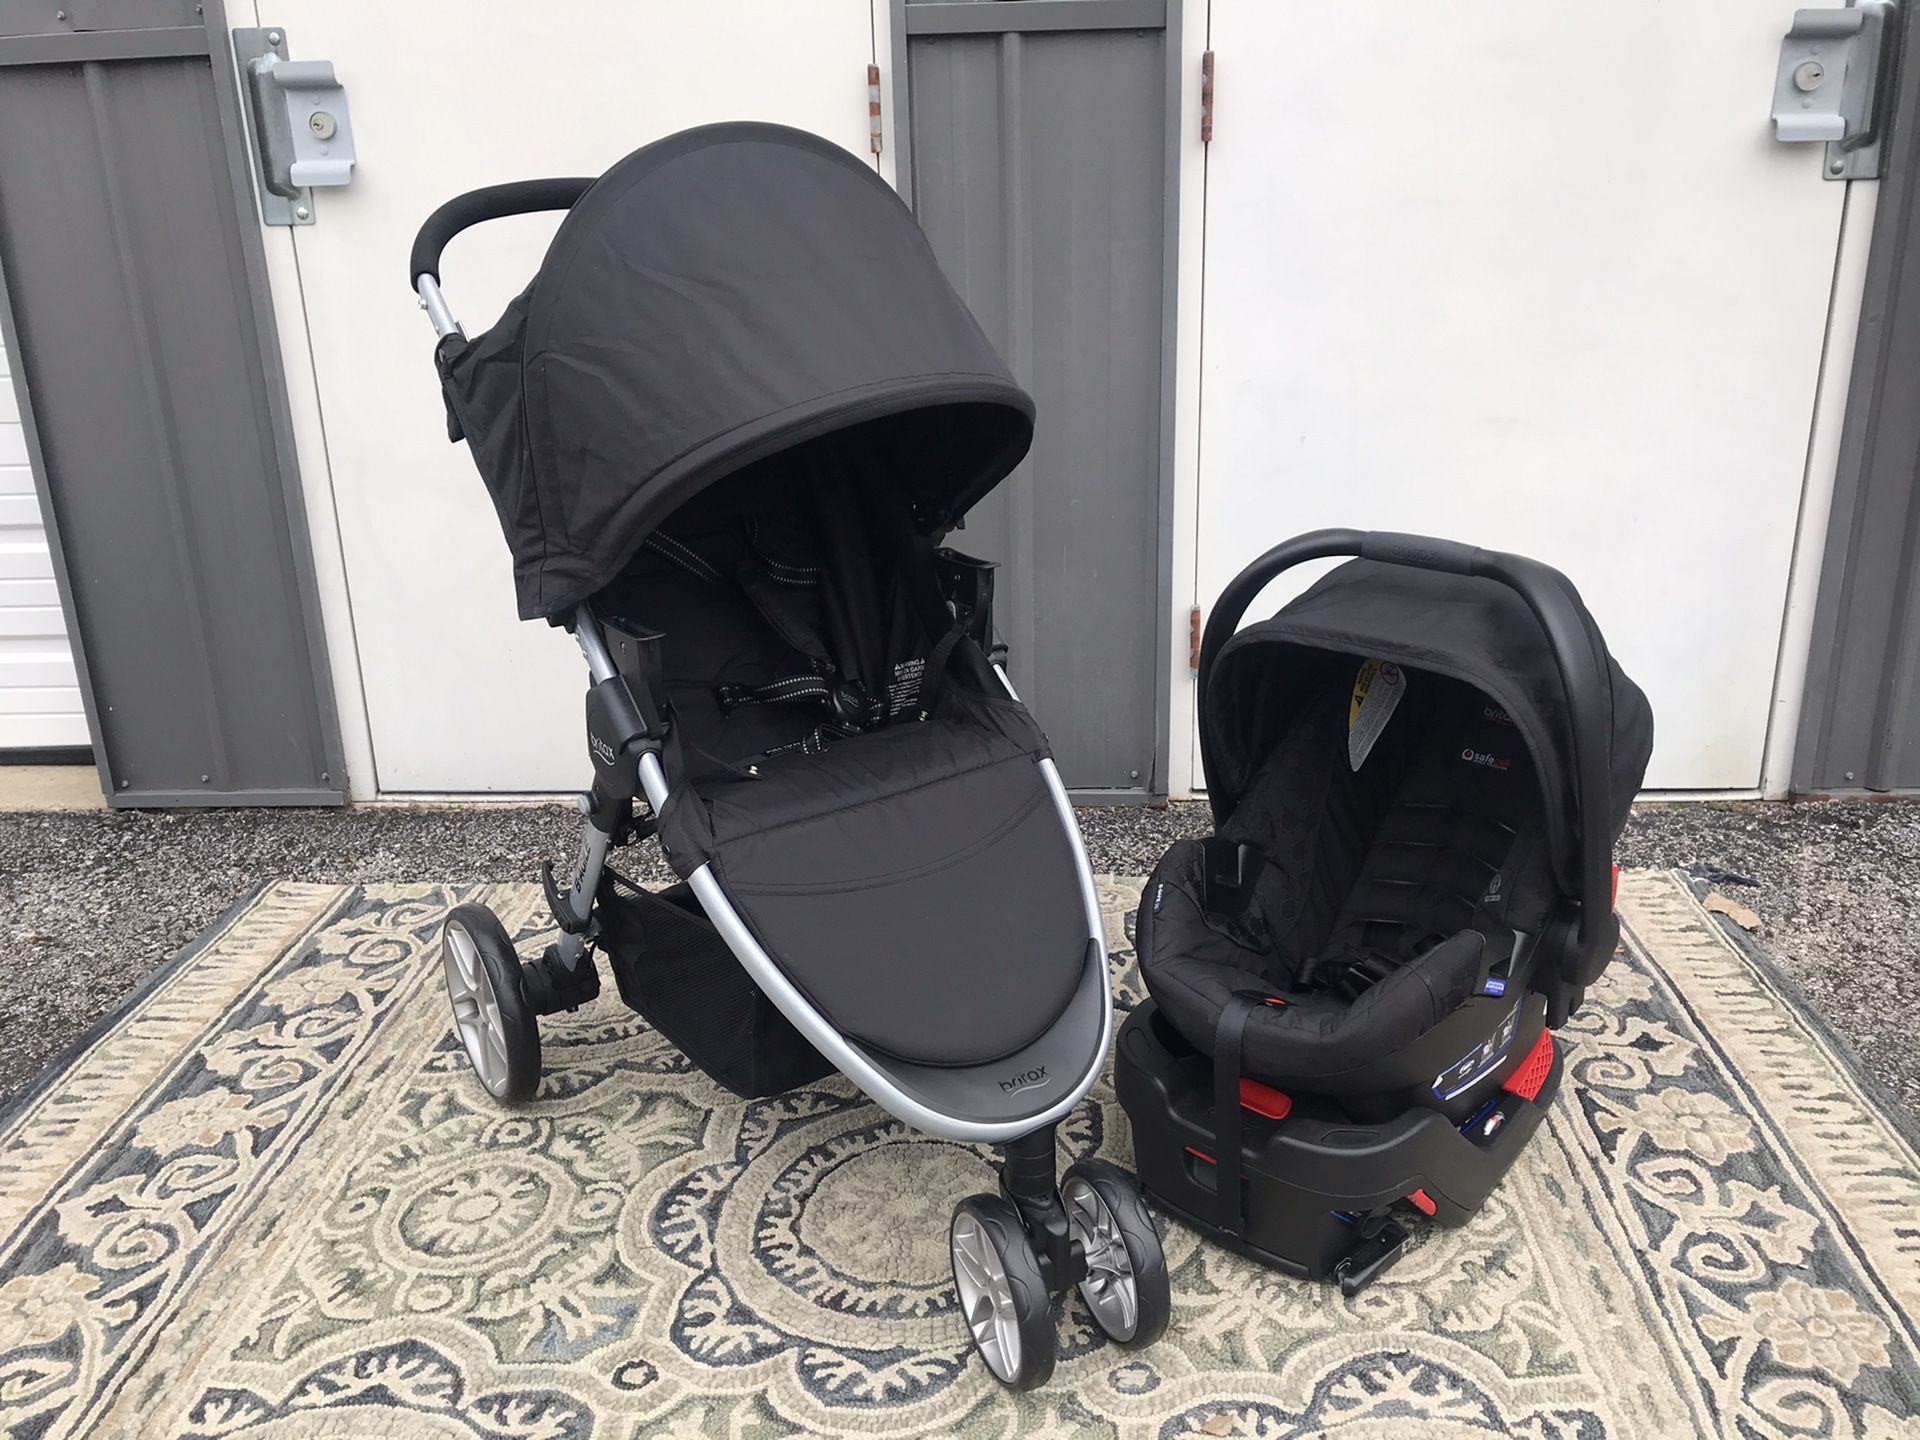 New Britax travel system stroller and infant car seat